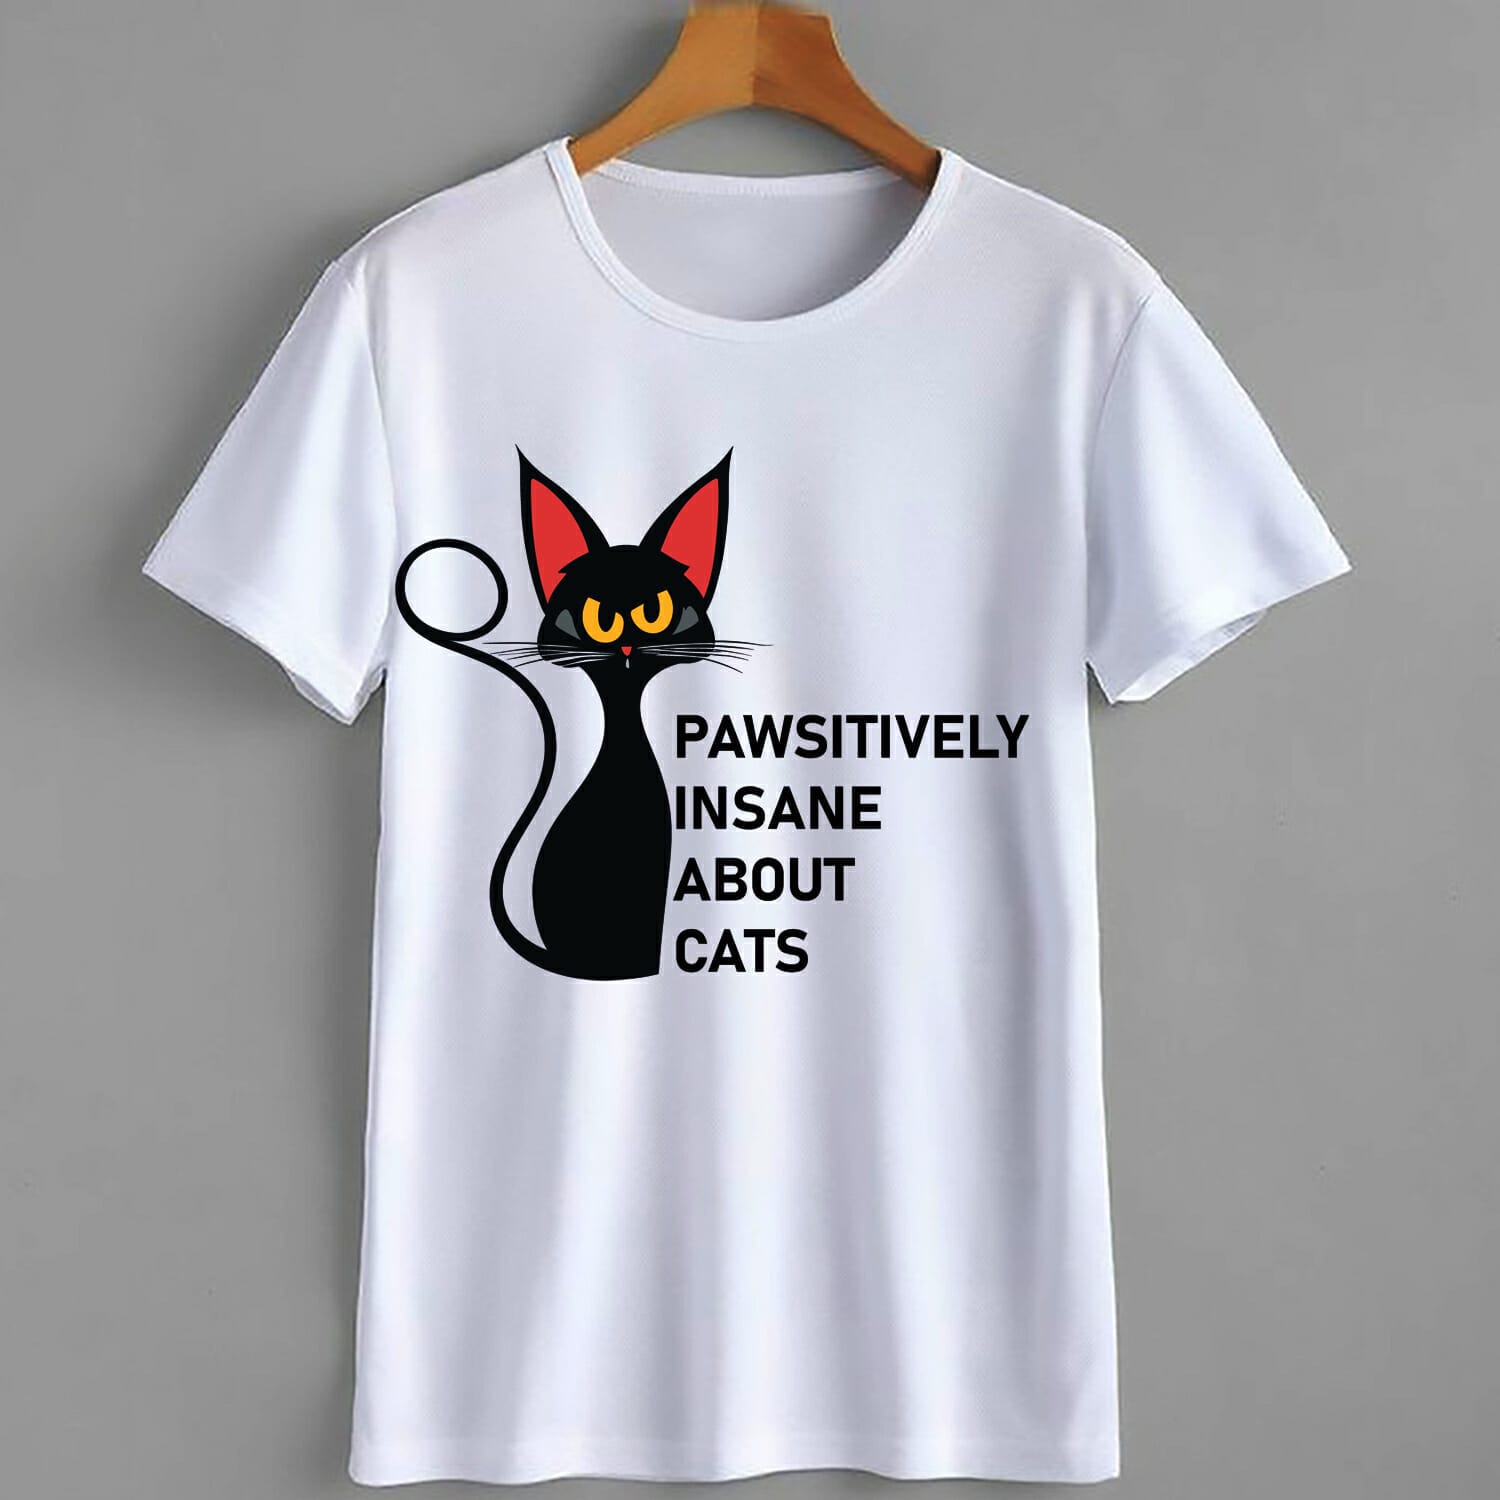 Pawsitively Insane About Cats T-Shirt Design